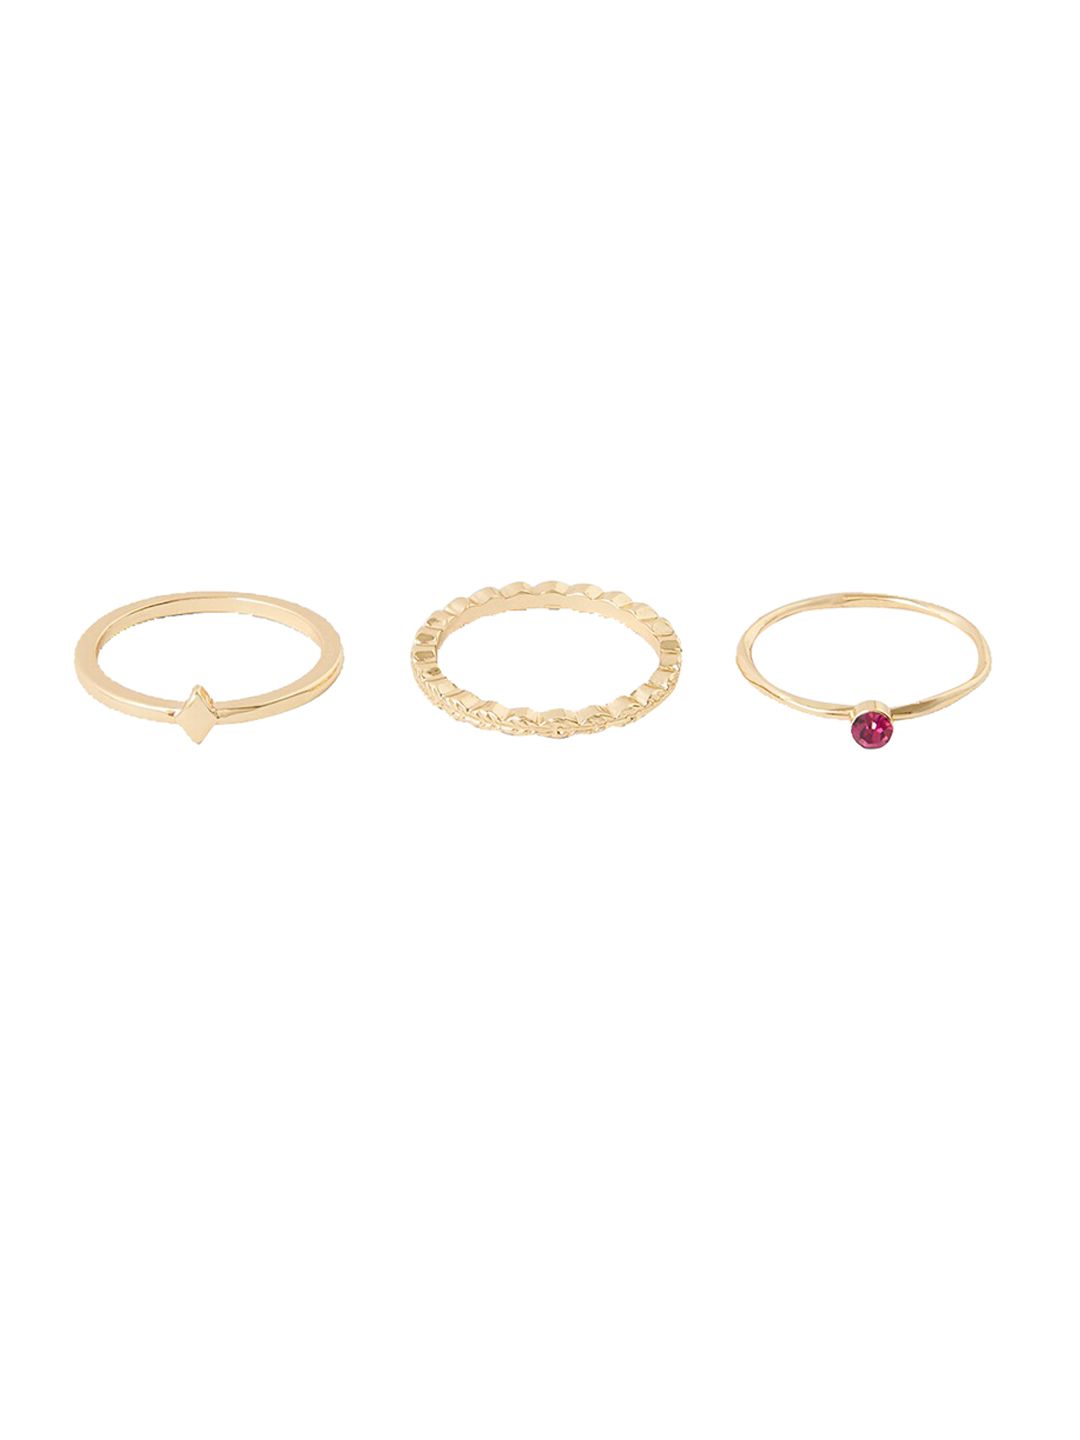 Accessorize Set Of 3 Gold-Toned & Pink Finger Rings Price in India